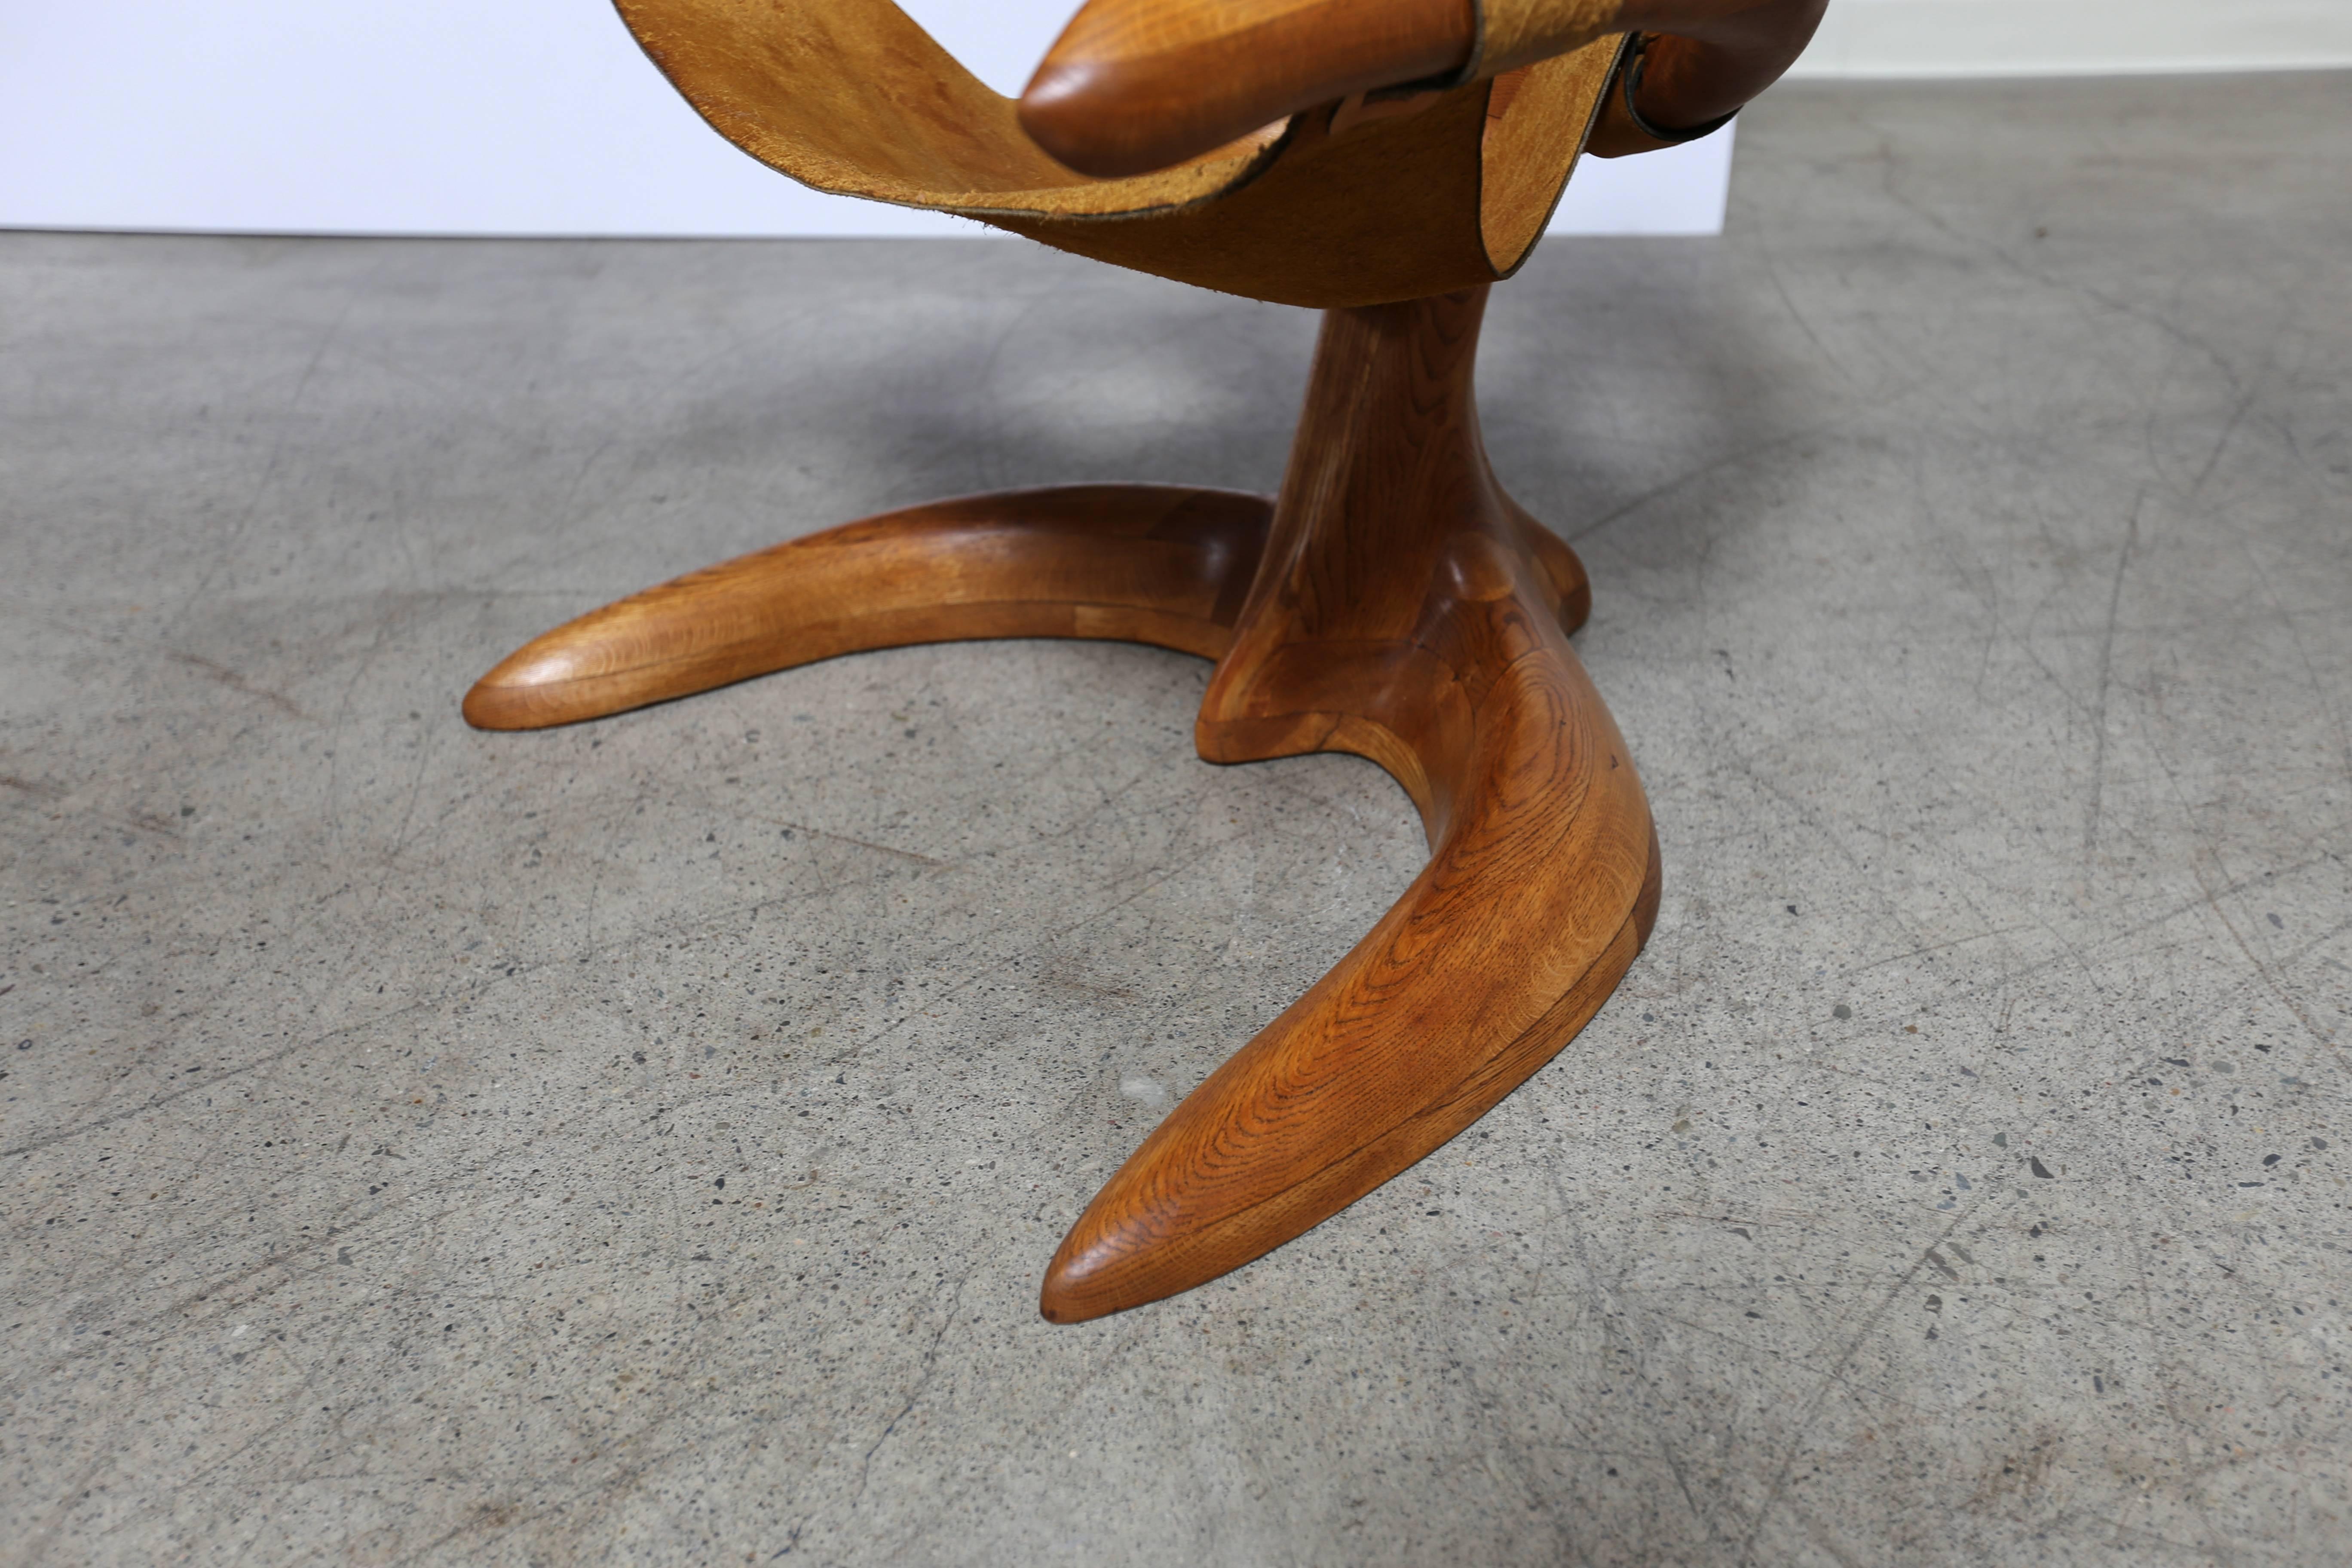 Studio Crafted Lounge Chair by Californian Woodworker Tim Crowder = MOVING SALE! 2